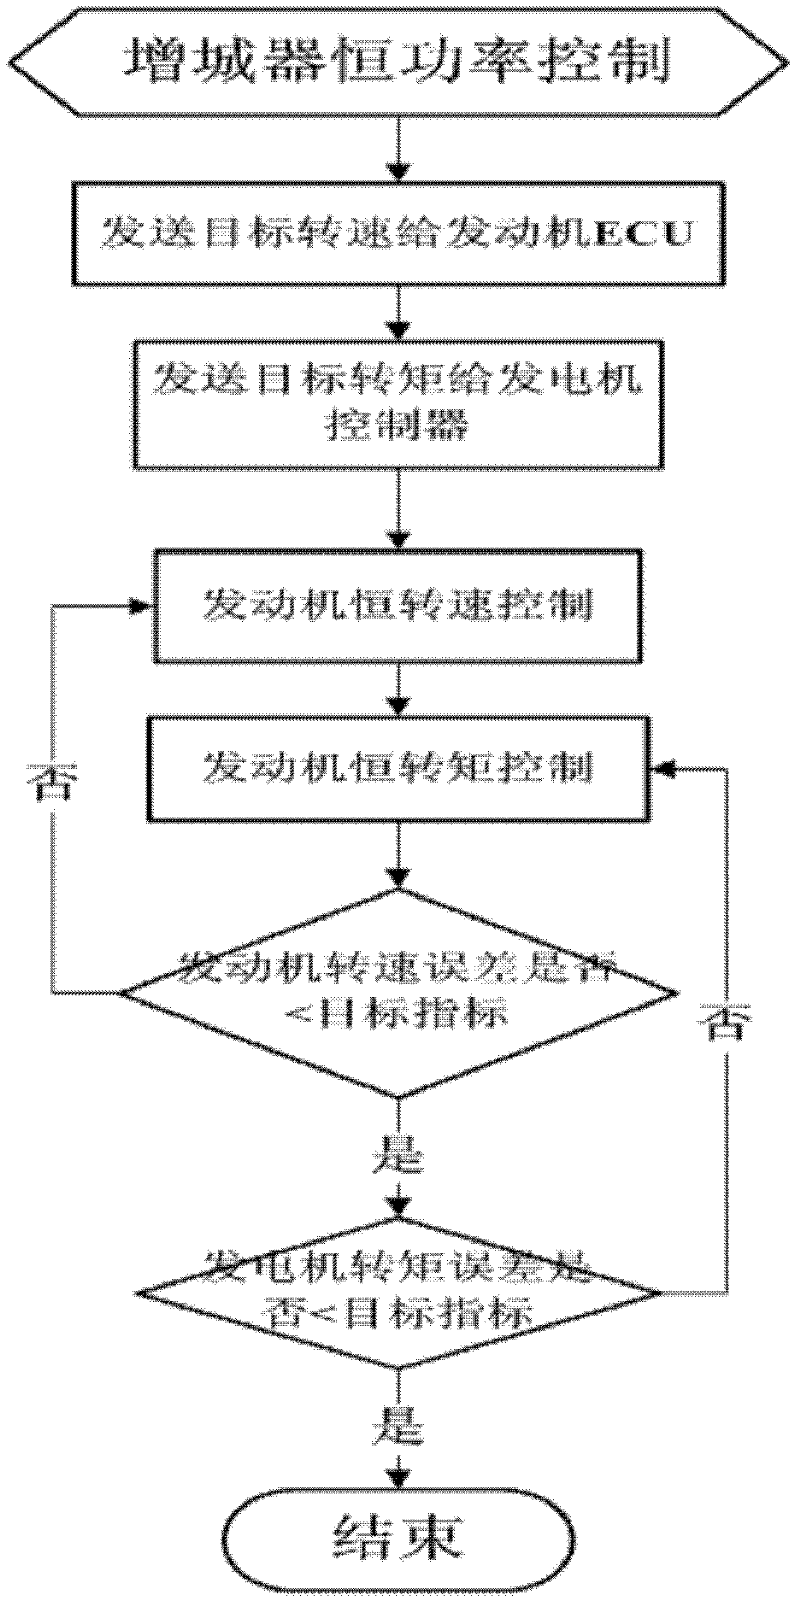 Range-extending electric vehicle control system and method